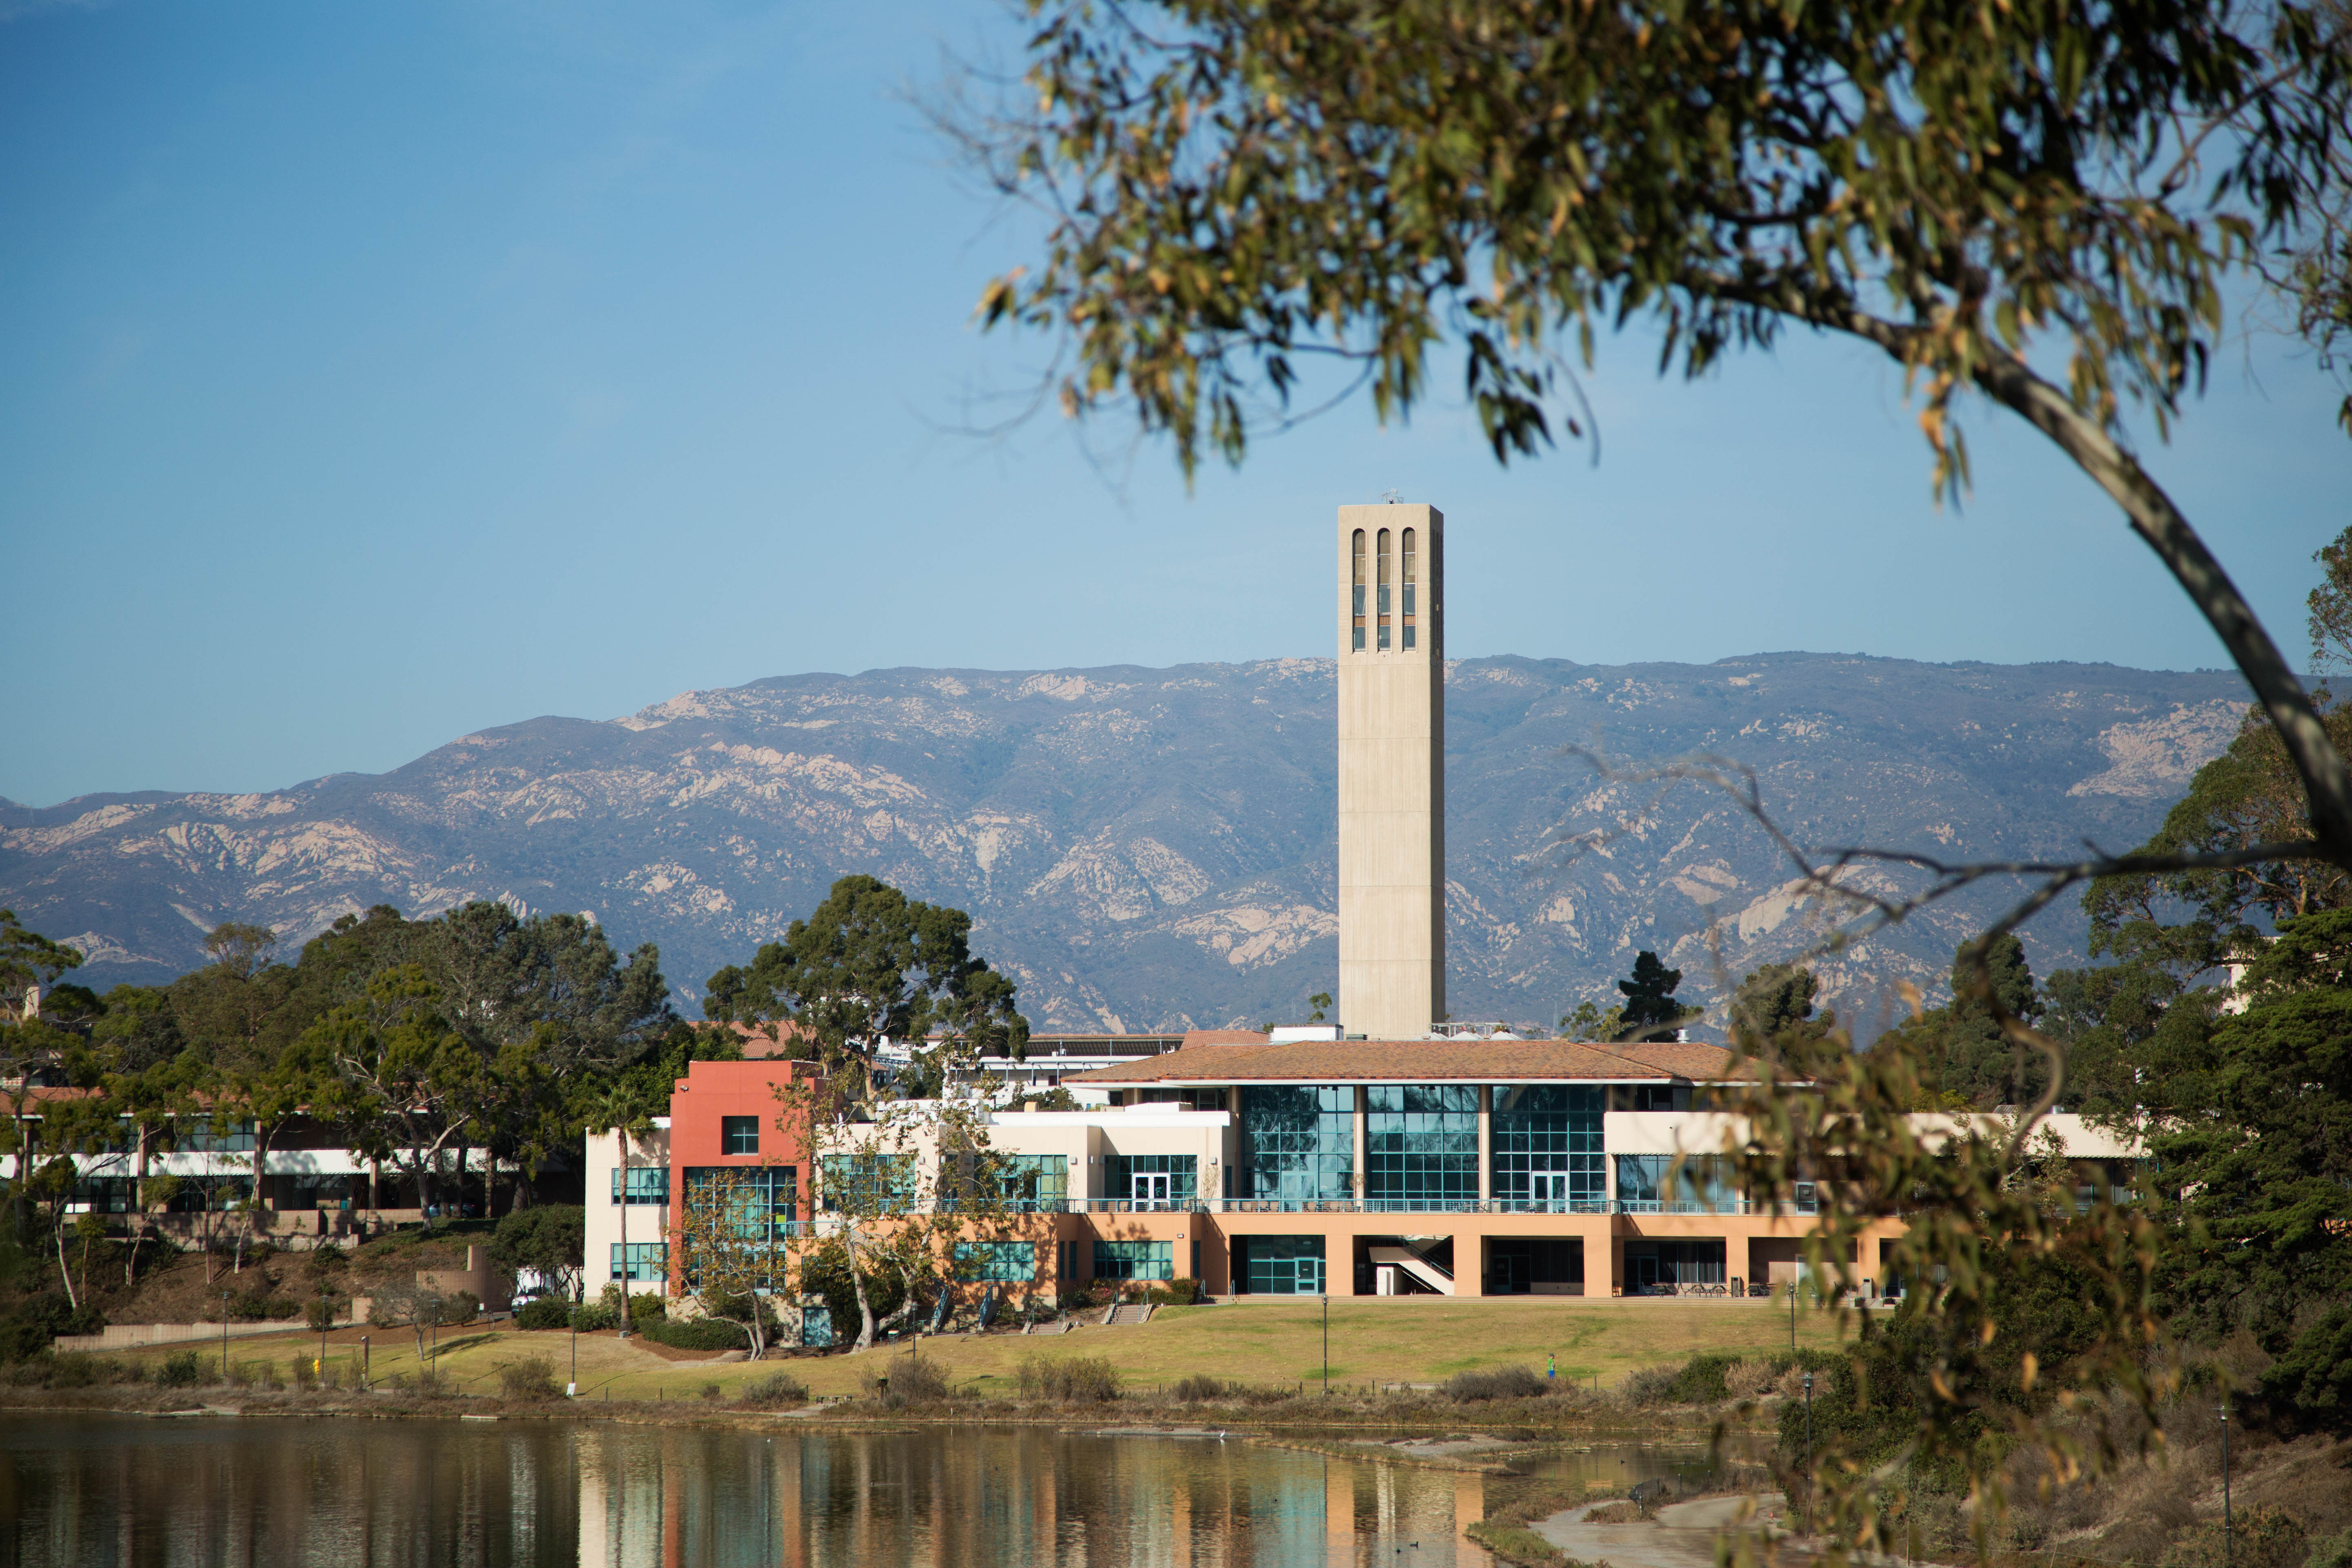 UCSB’s COVID-19 Plans - The Bottom Line UCSB